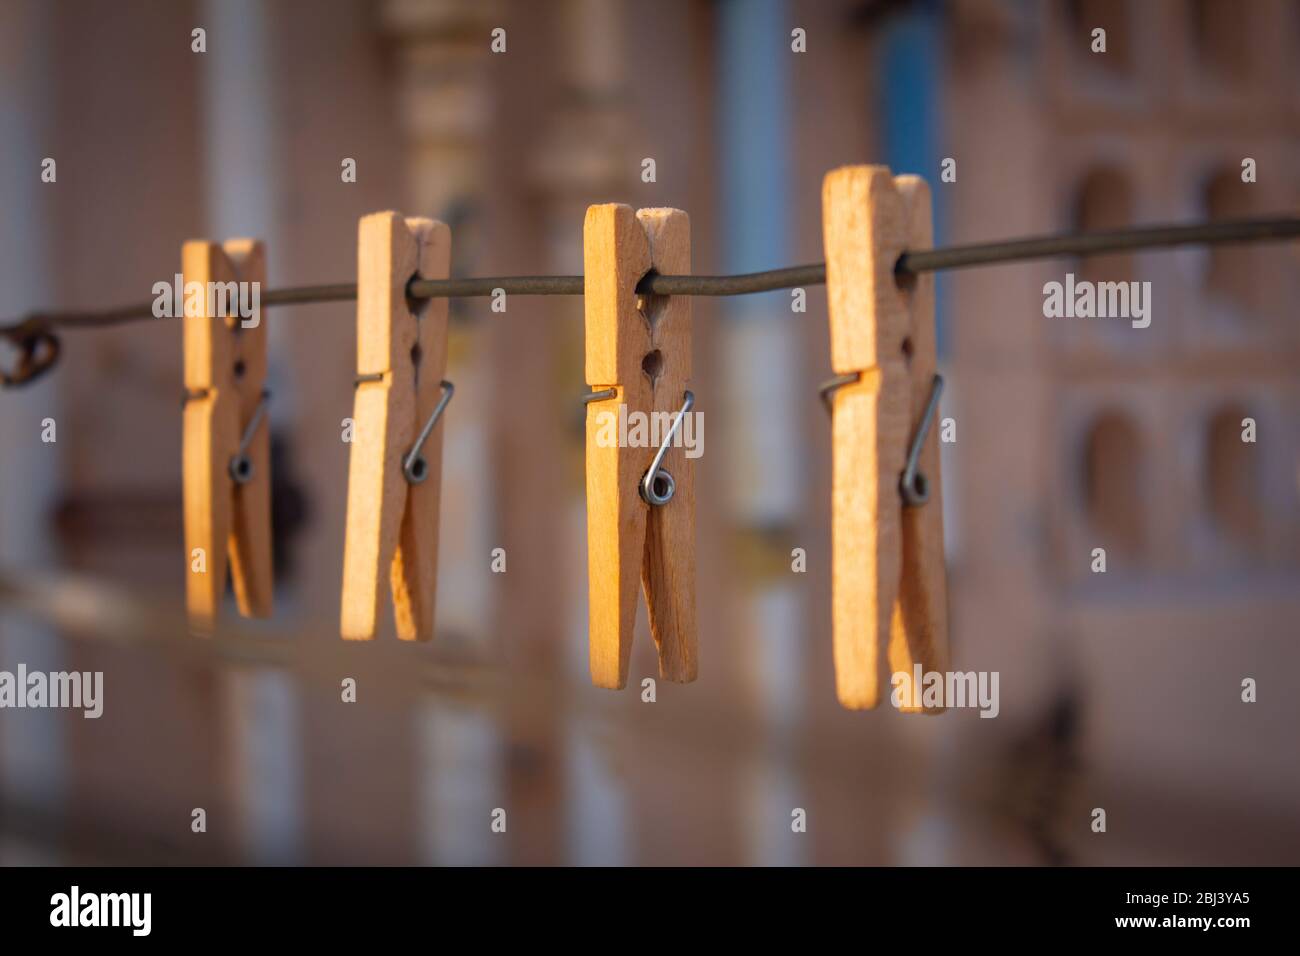 View of the wooden clips for holding clothes put for drying. Stock Photo